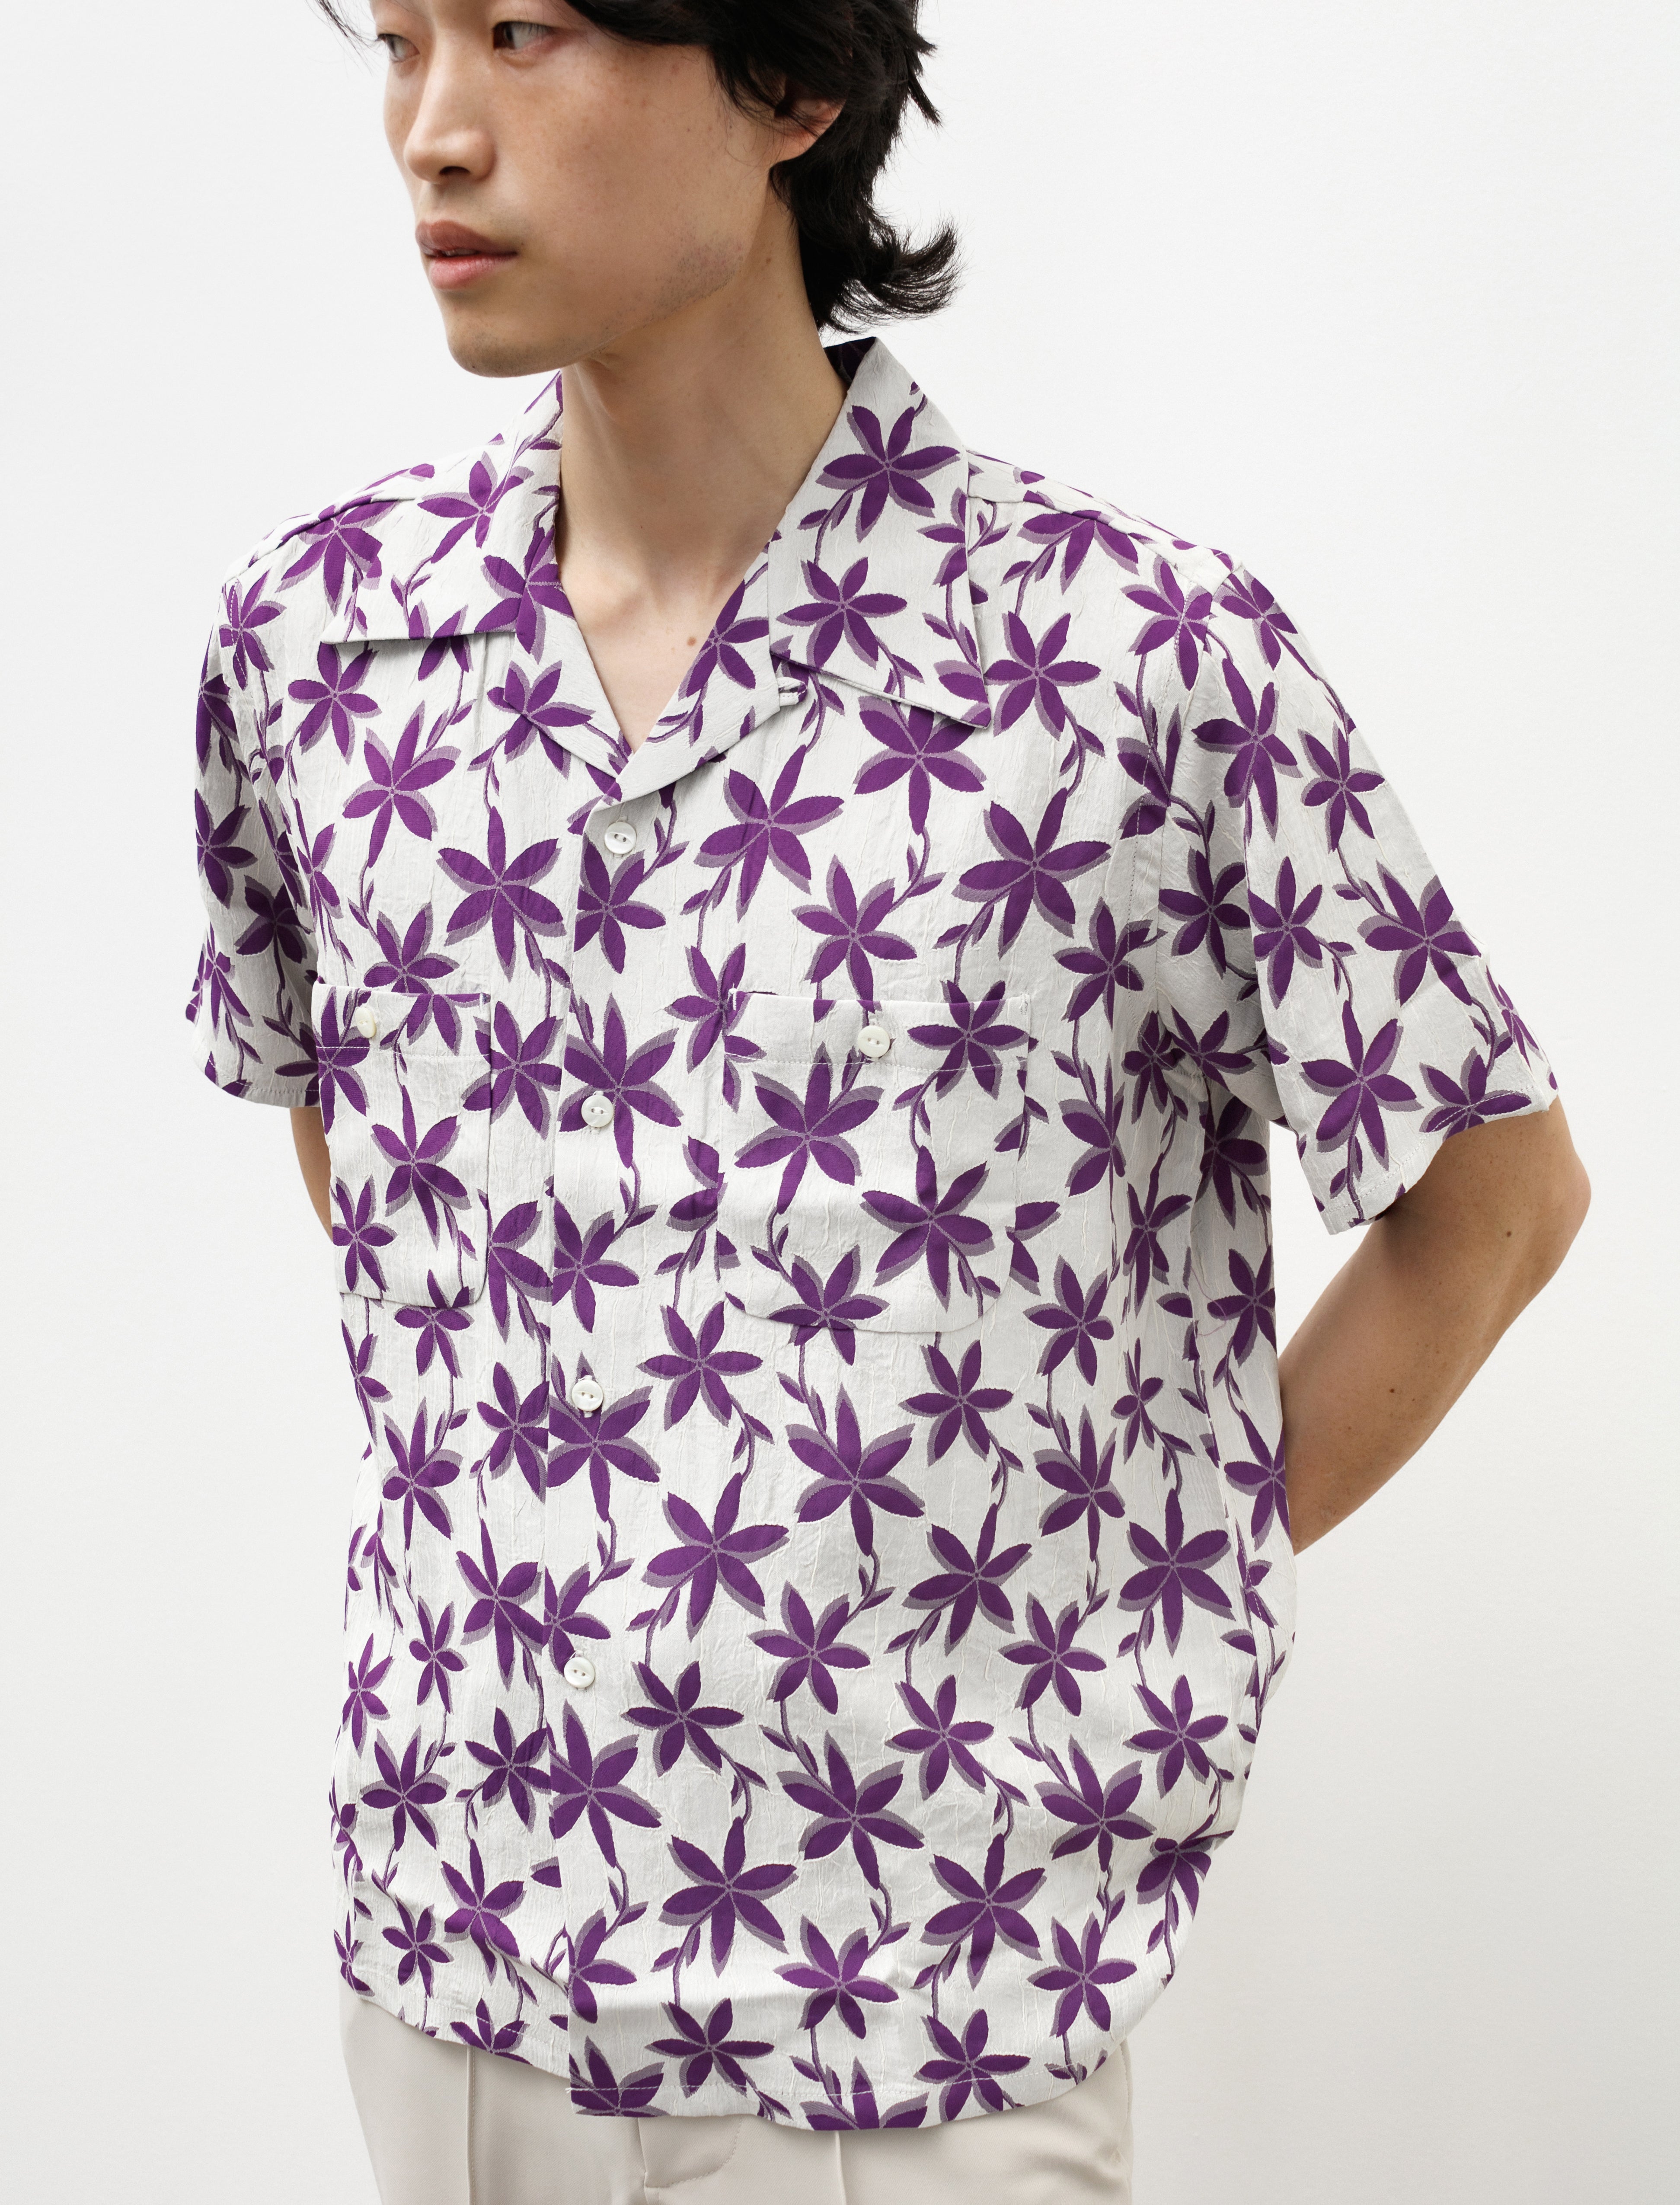 S/S One-Up Shirt Floral Jacquard Off White